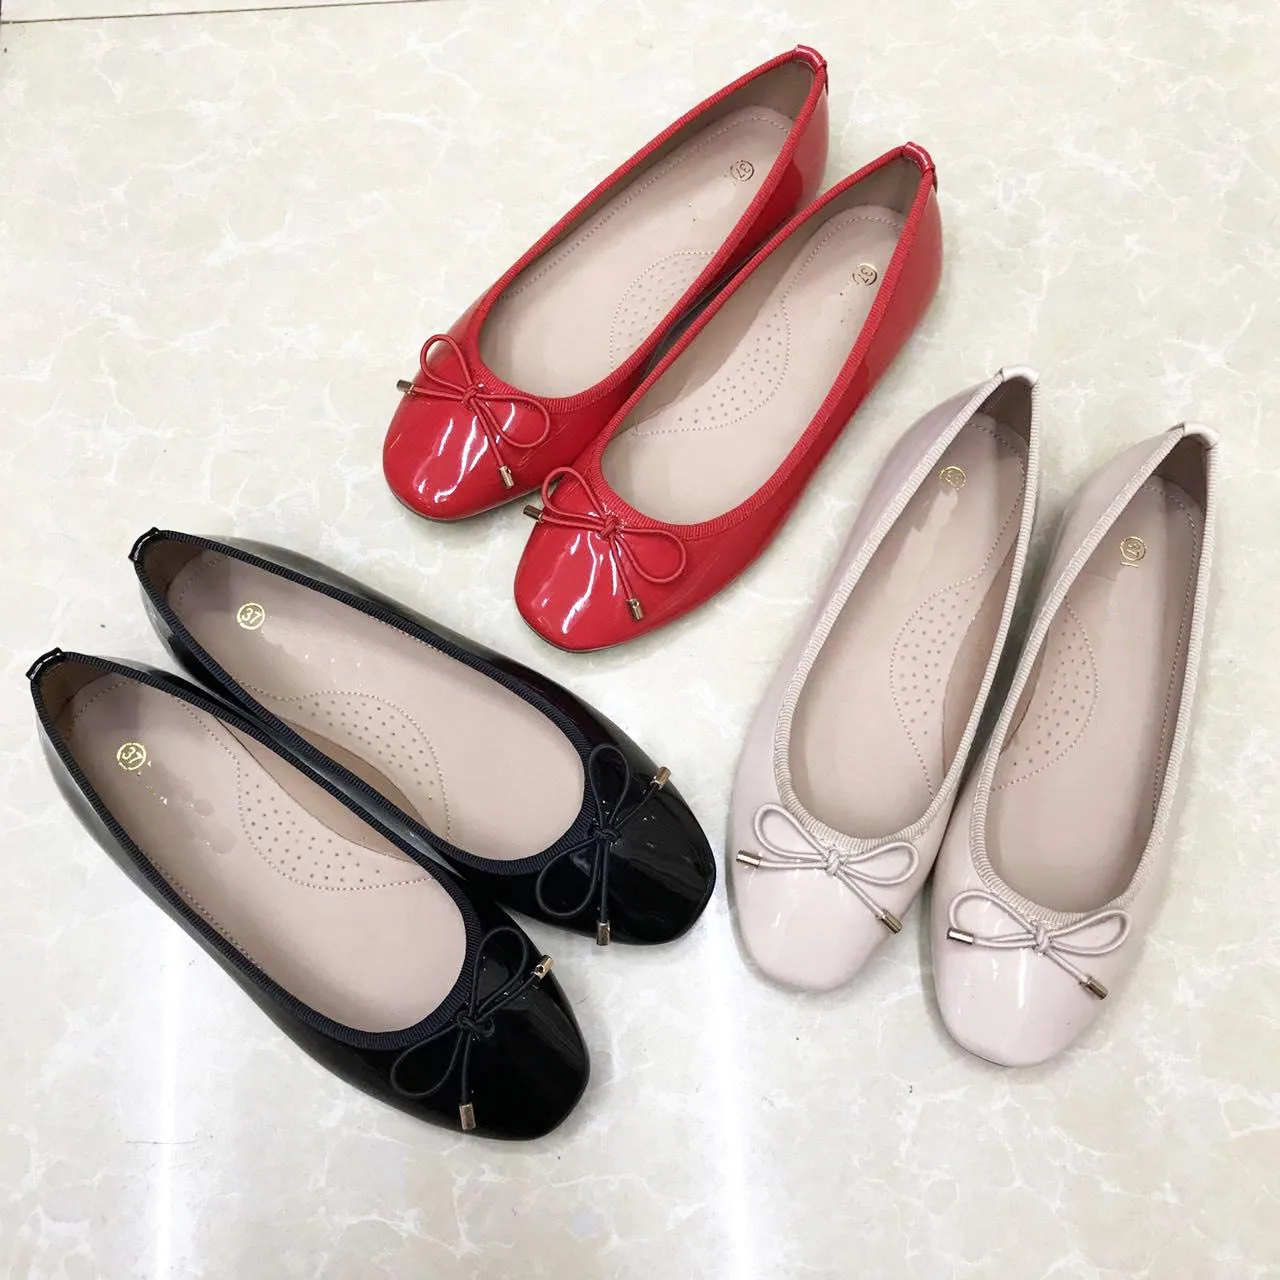 Office Lady Red Ballet Pointe Outdoor Pumps Shoes For - Buy Office Lady Shoes,Outdoor Ballet Shoes,Red Ballet Pointe Shoes For Sale Product on Alibaba.com